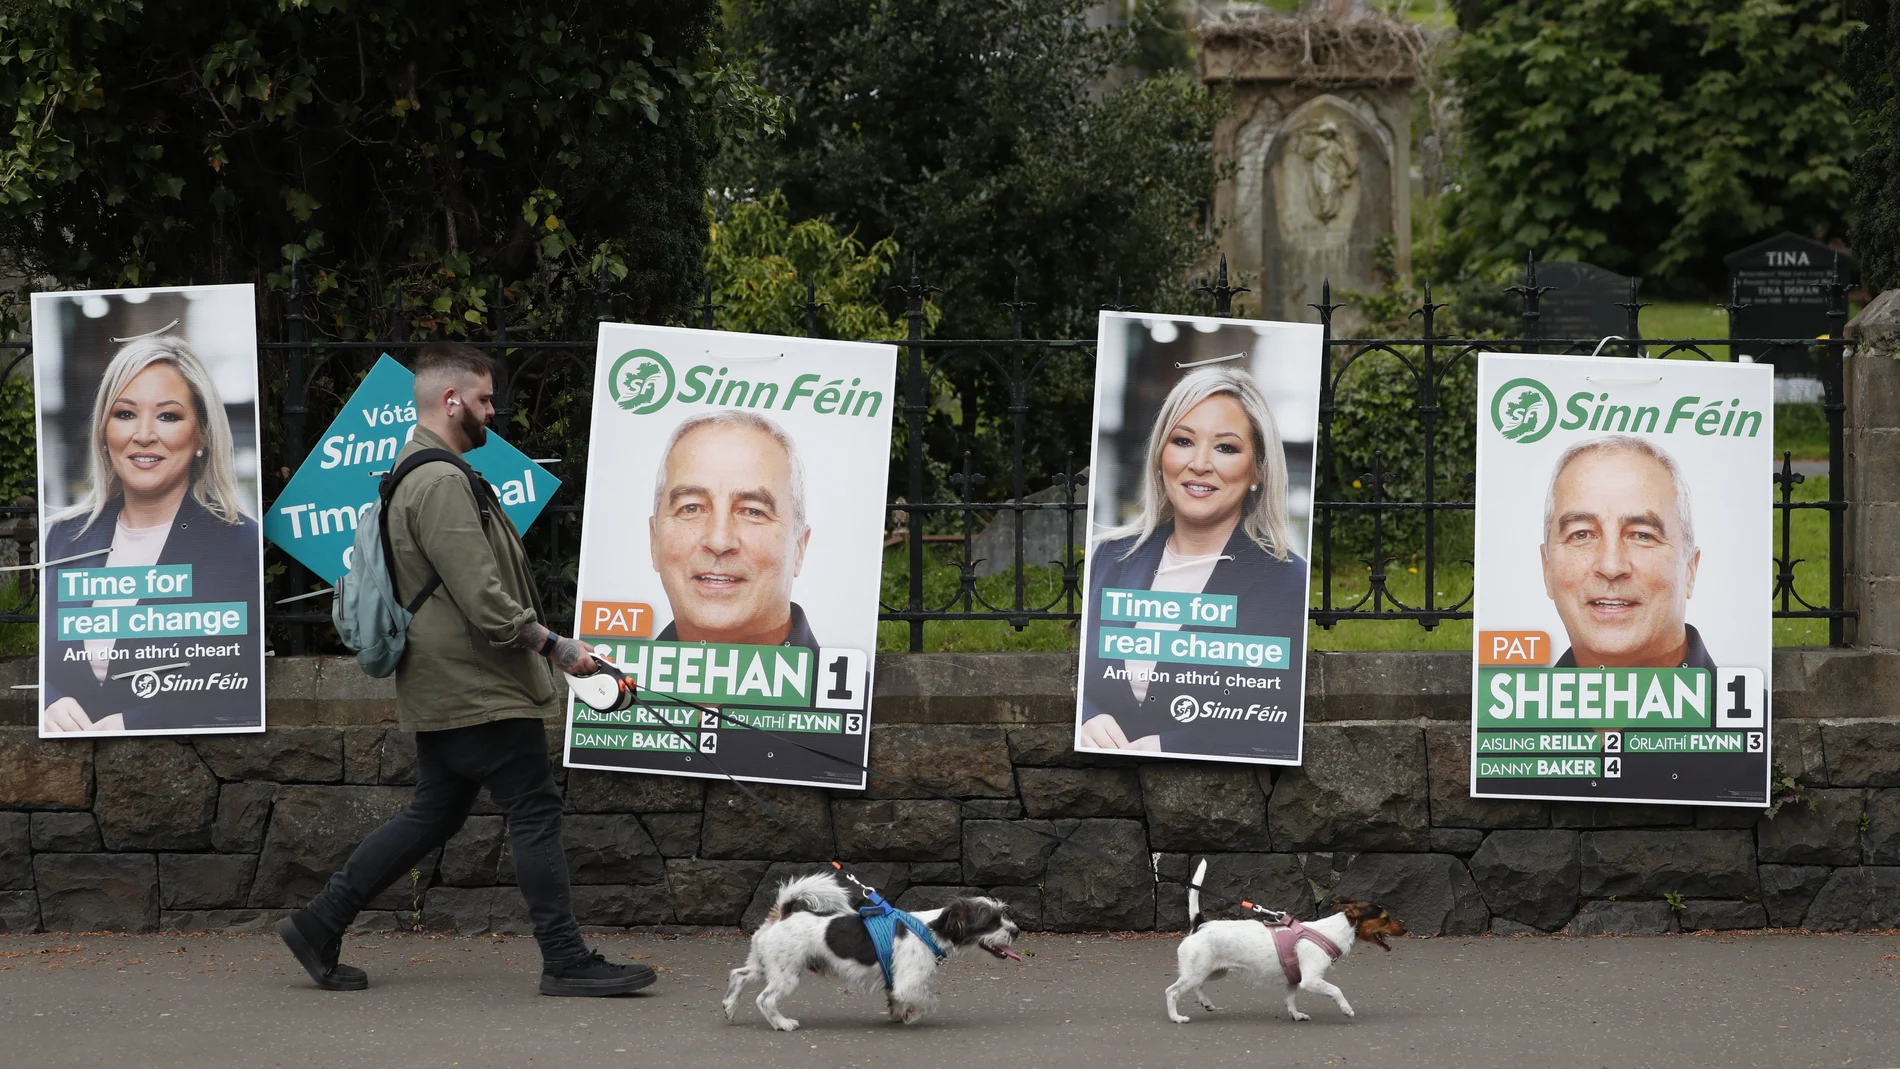 A man walks his dogs past election posters on the Falls road in West Belfast, Northern Ireland, Thursday May 5, 2022. Sinn Fein, a force in Irish republicanism on both sides of the Irish border looks likely to become the largest party in the assembly, according to polls ahead of the May 5, 2022 local elections. (AP Photo/Peter Morrison)